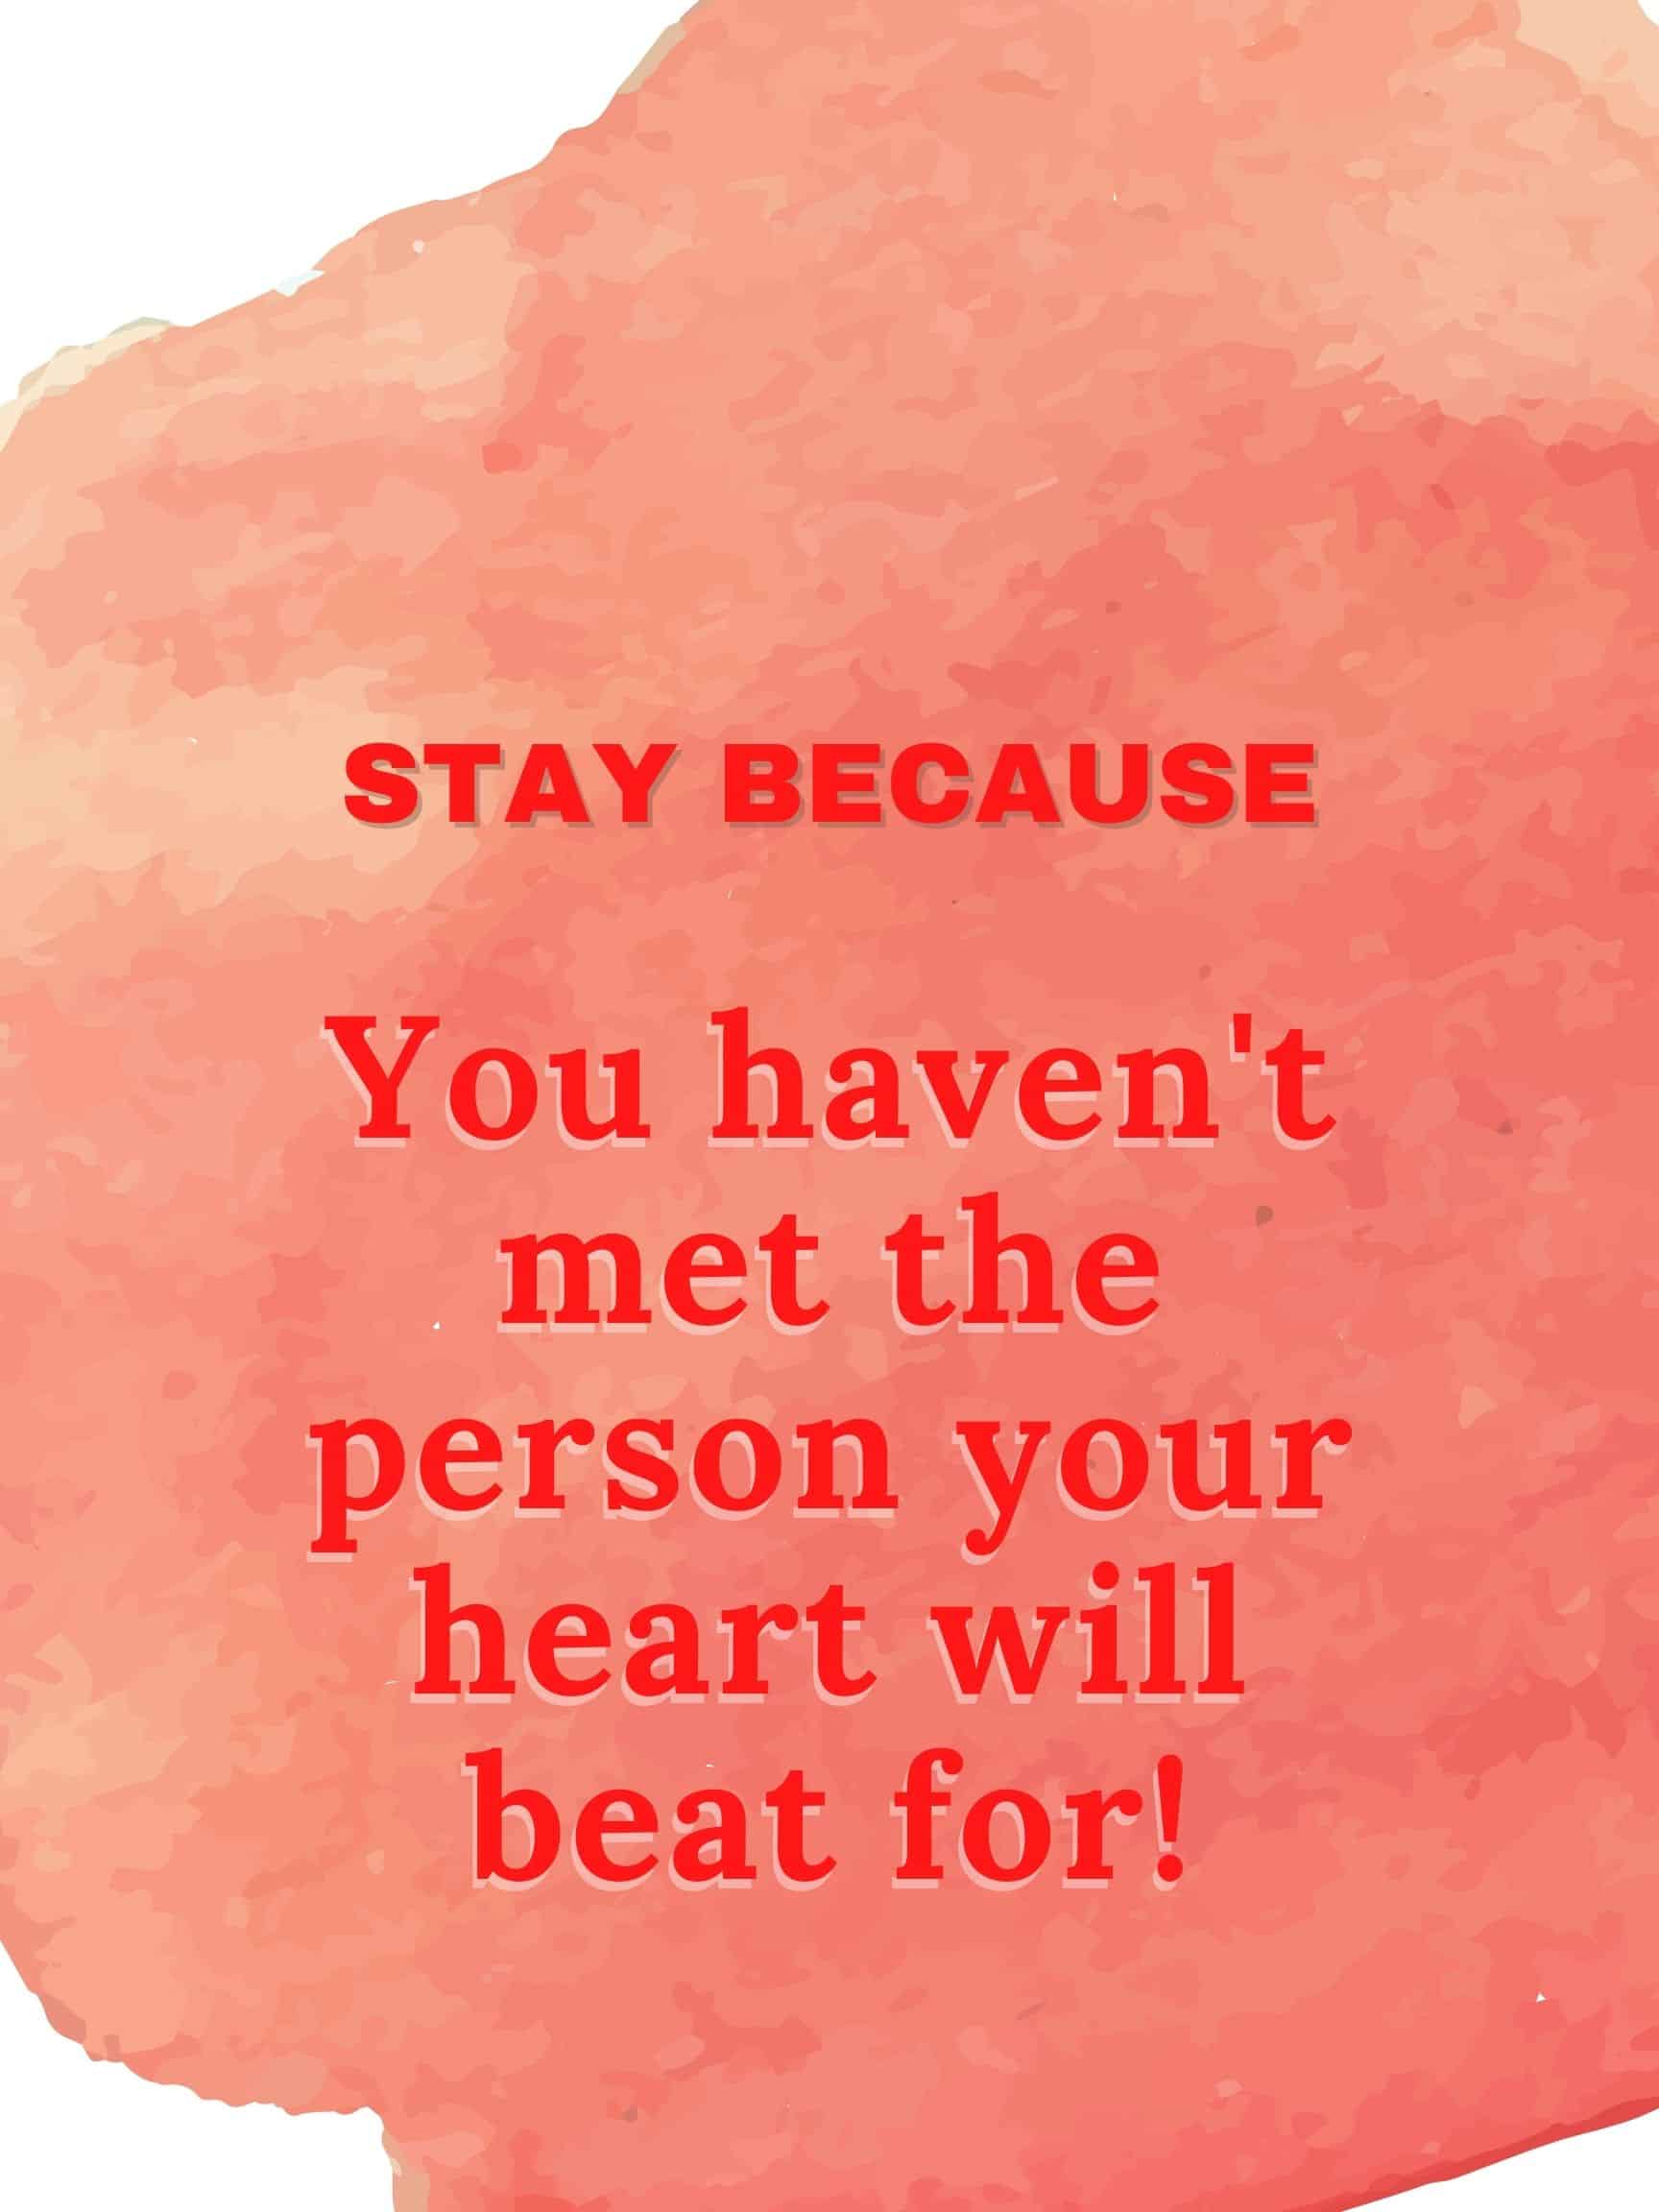 Stay because you haven't met the person your heart will beat for. #StayBecause